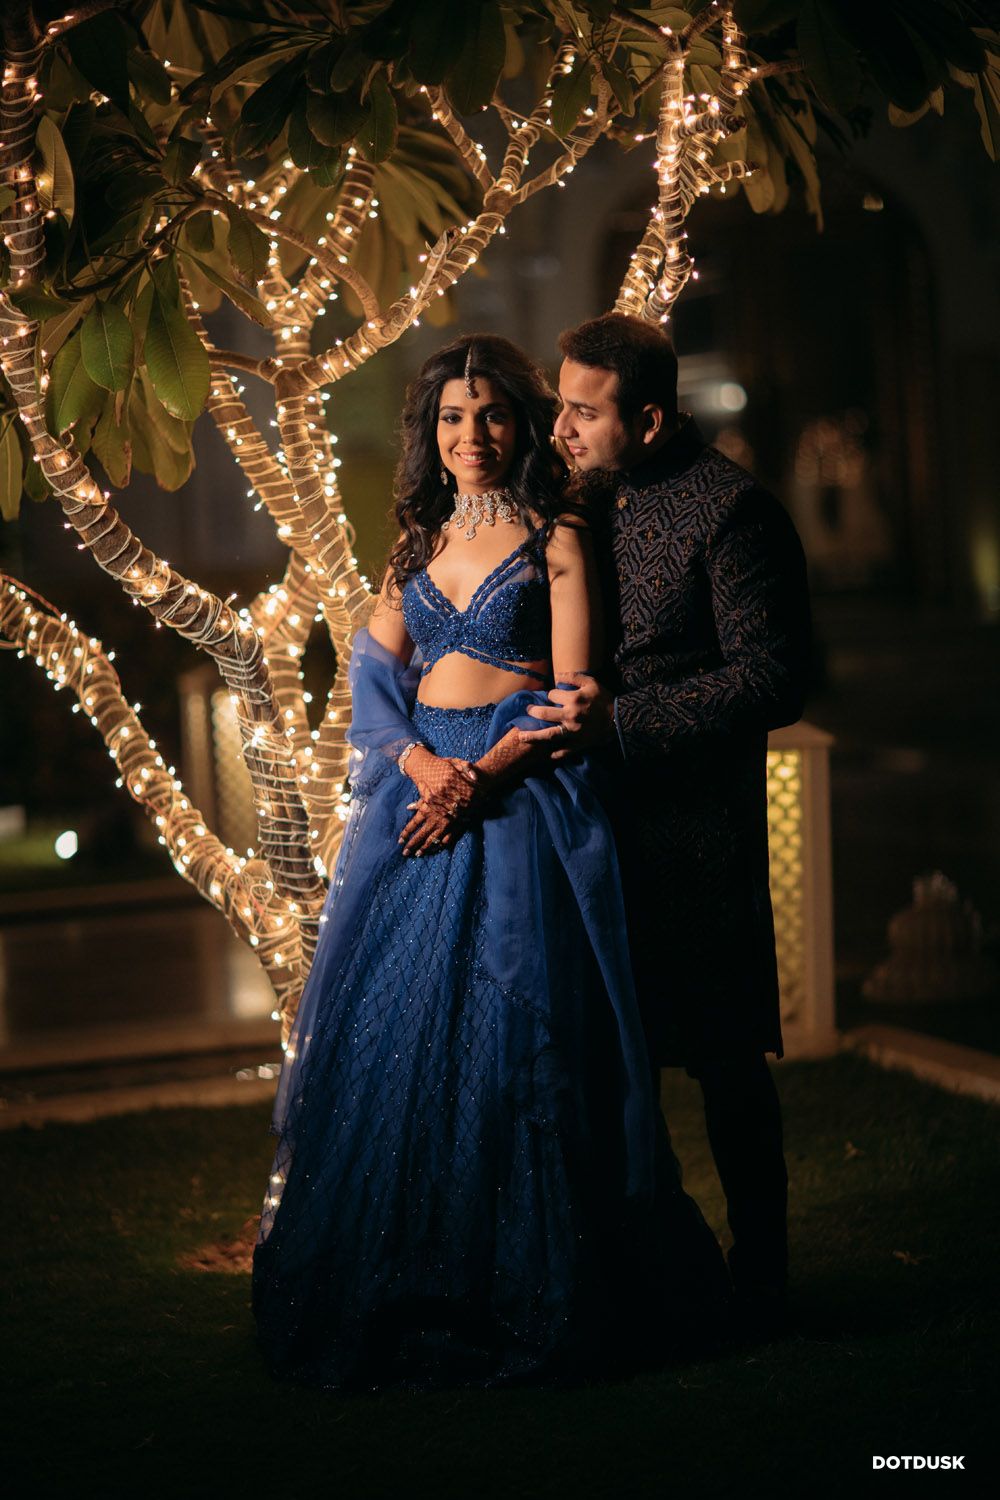 Photo of A romantic couple portrait in front of fairy lights decor